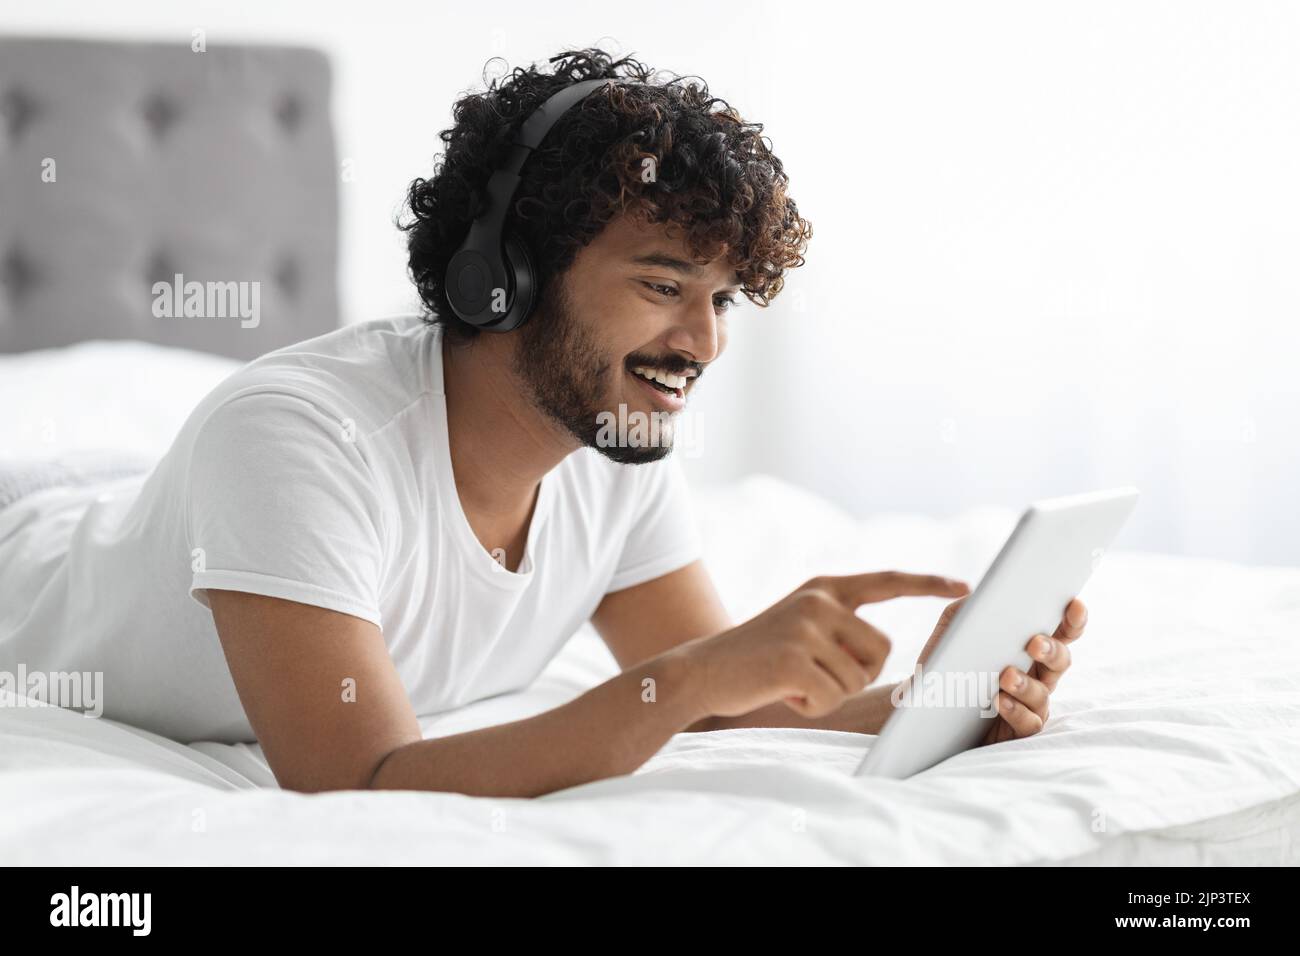 Relaxed hindu guy using digital tablet and headphones in bed Stock Photo